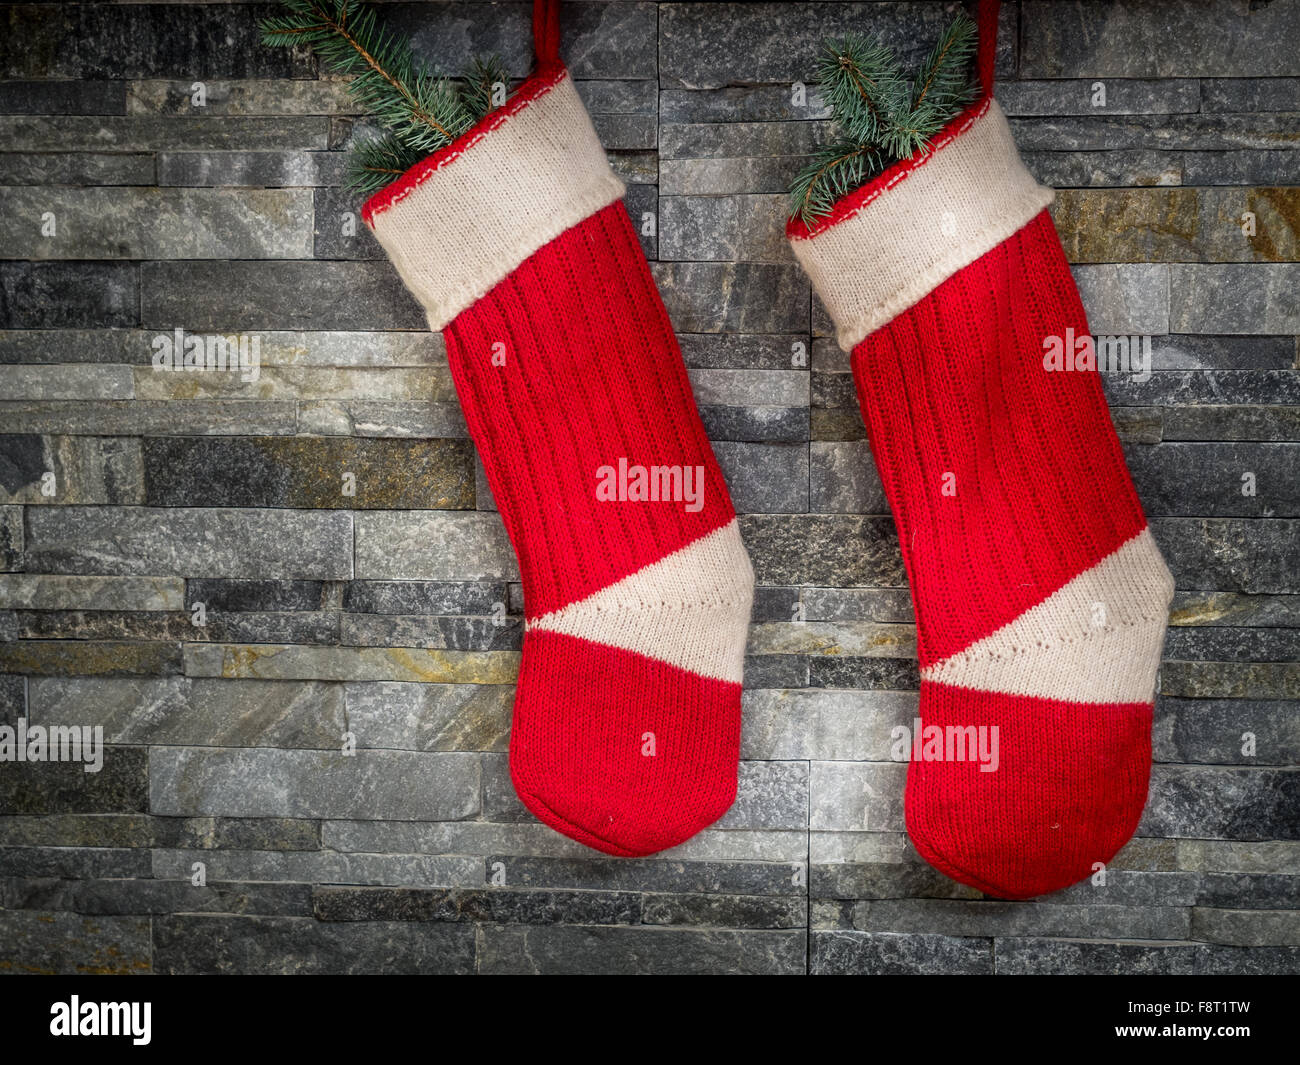 Pair of red Santa stocking hanging on stone wall Stock Photo